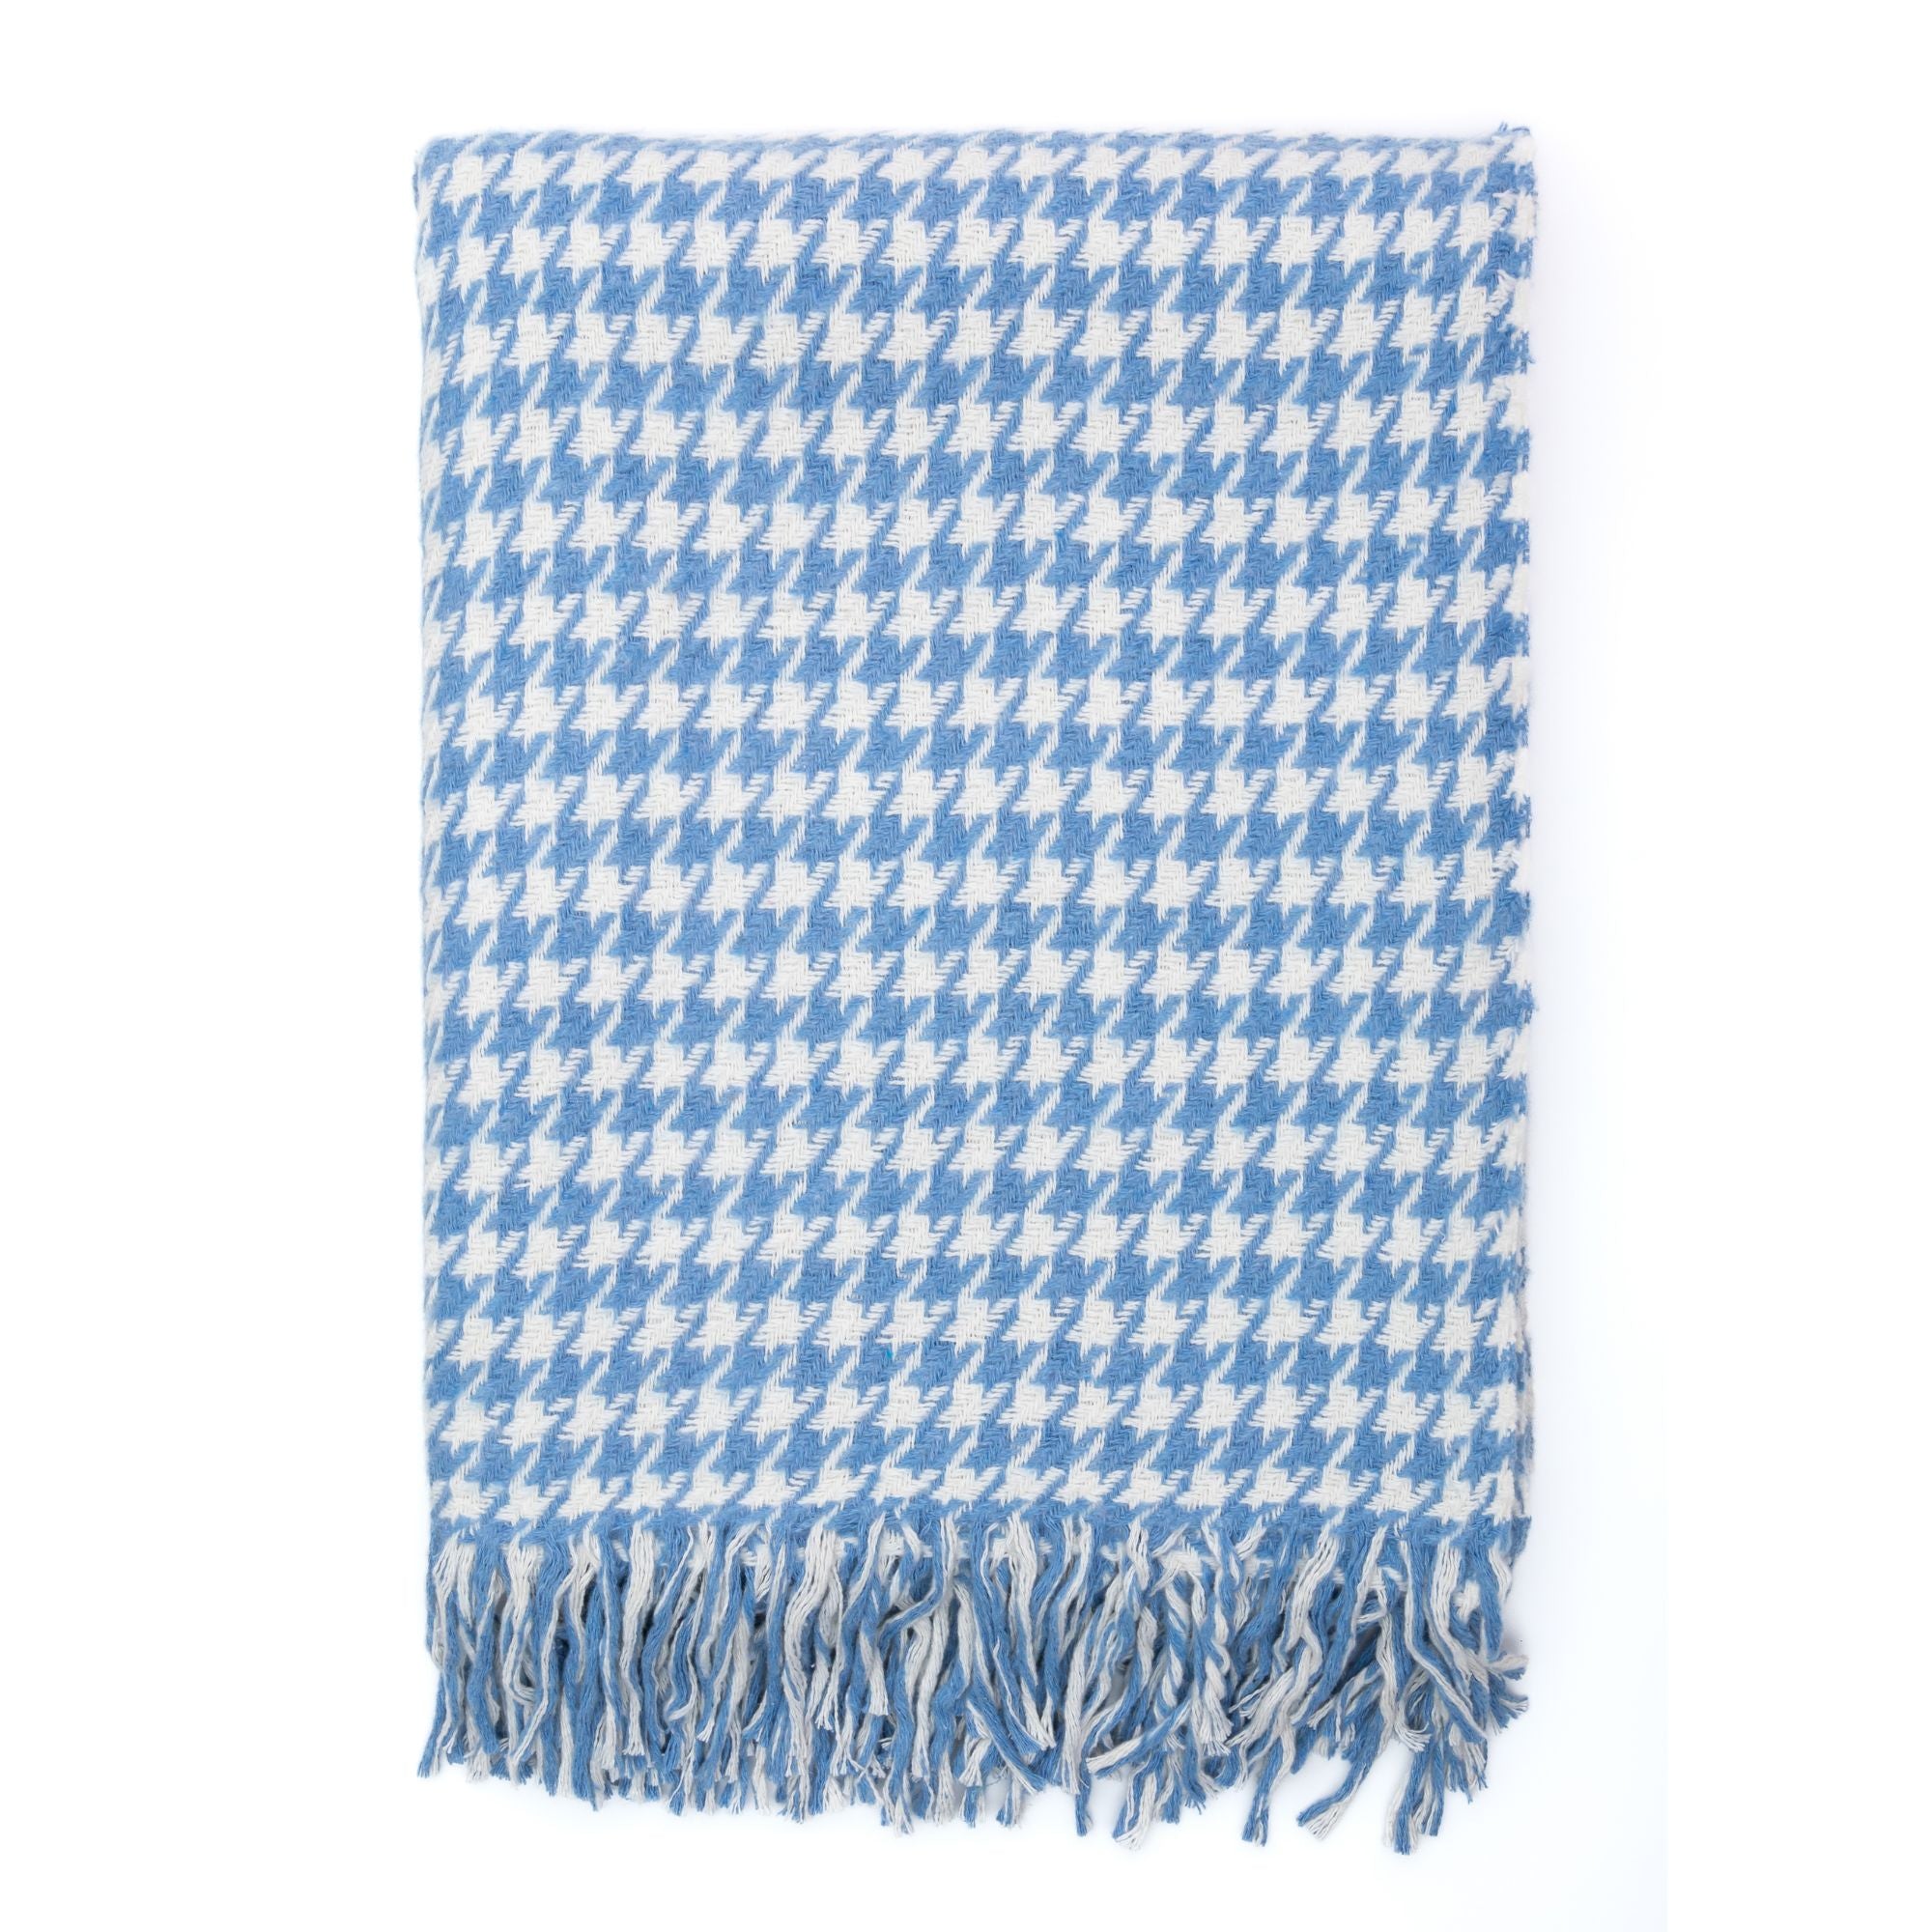 Trimita  |  Blue Houndstooth Luxury Throw Blanket displayed against a pure white background, showcasing its intricate weaving pattern